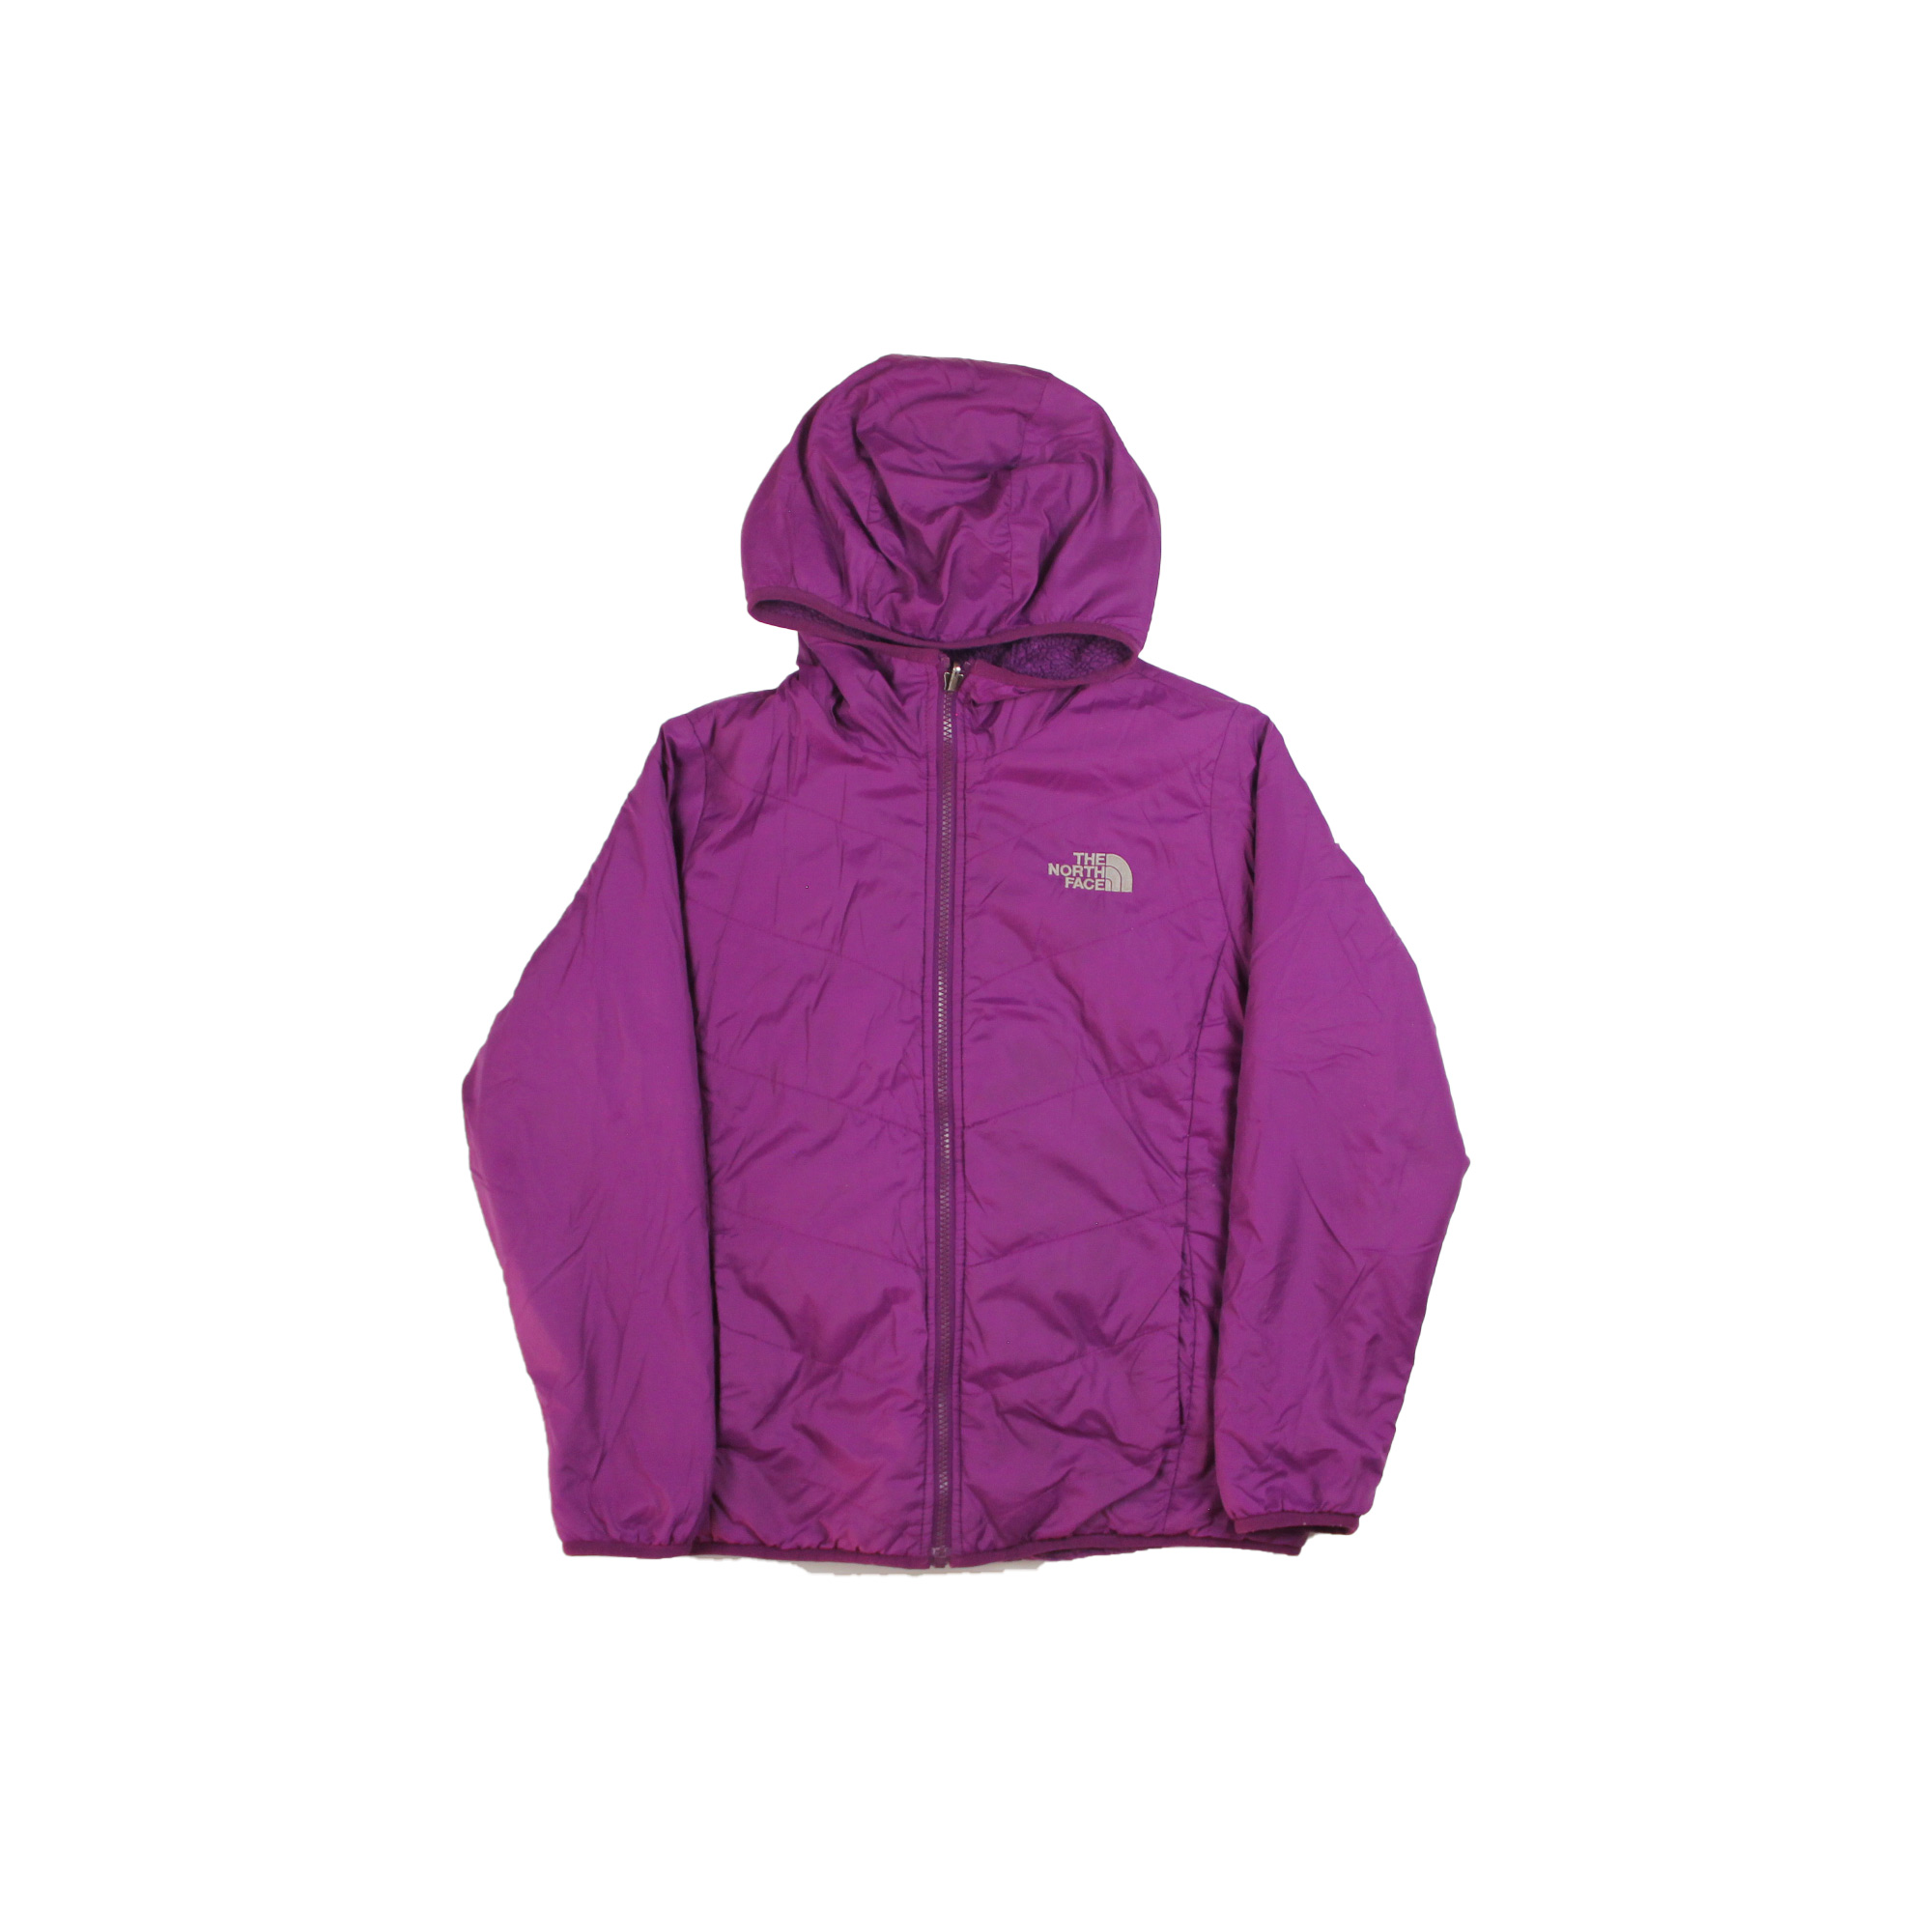 The North Face Reversible Jacket - Women's S